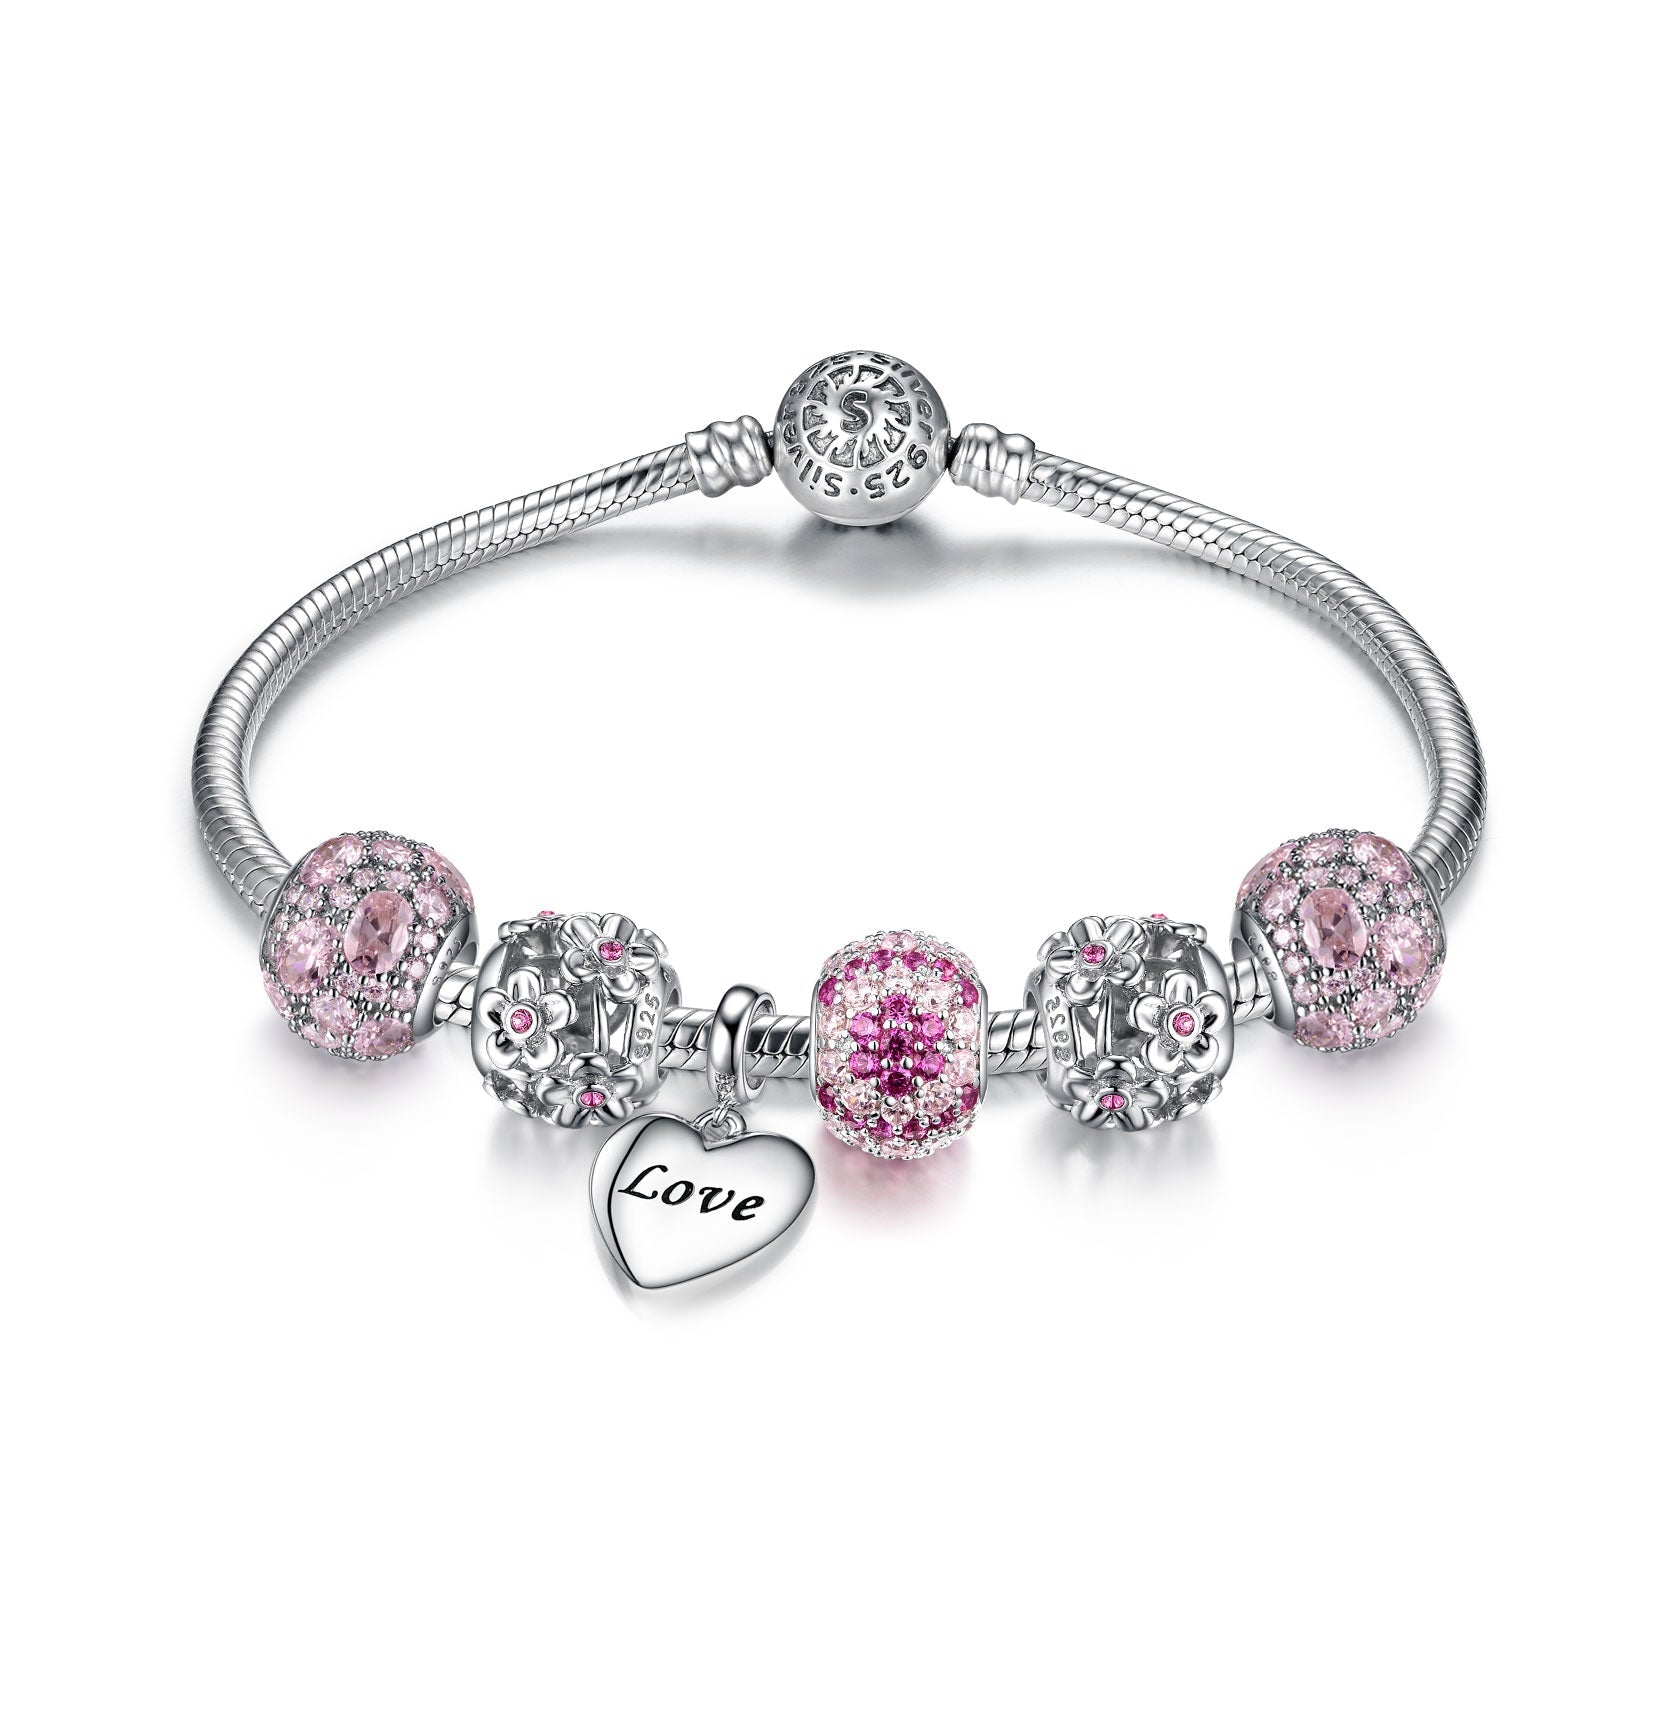 Jewdii 925 Sterling Silver Bracelet Pink Beads and Crystals Set